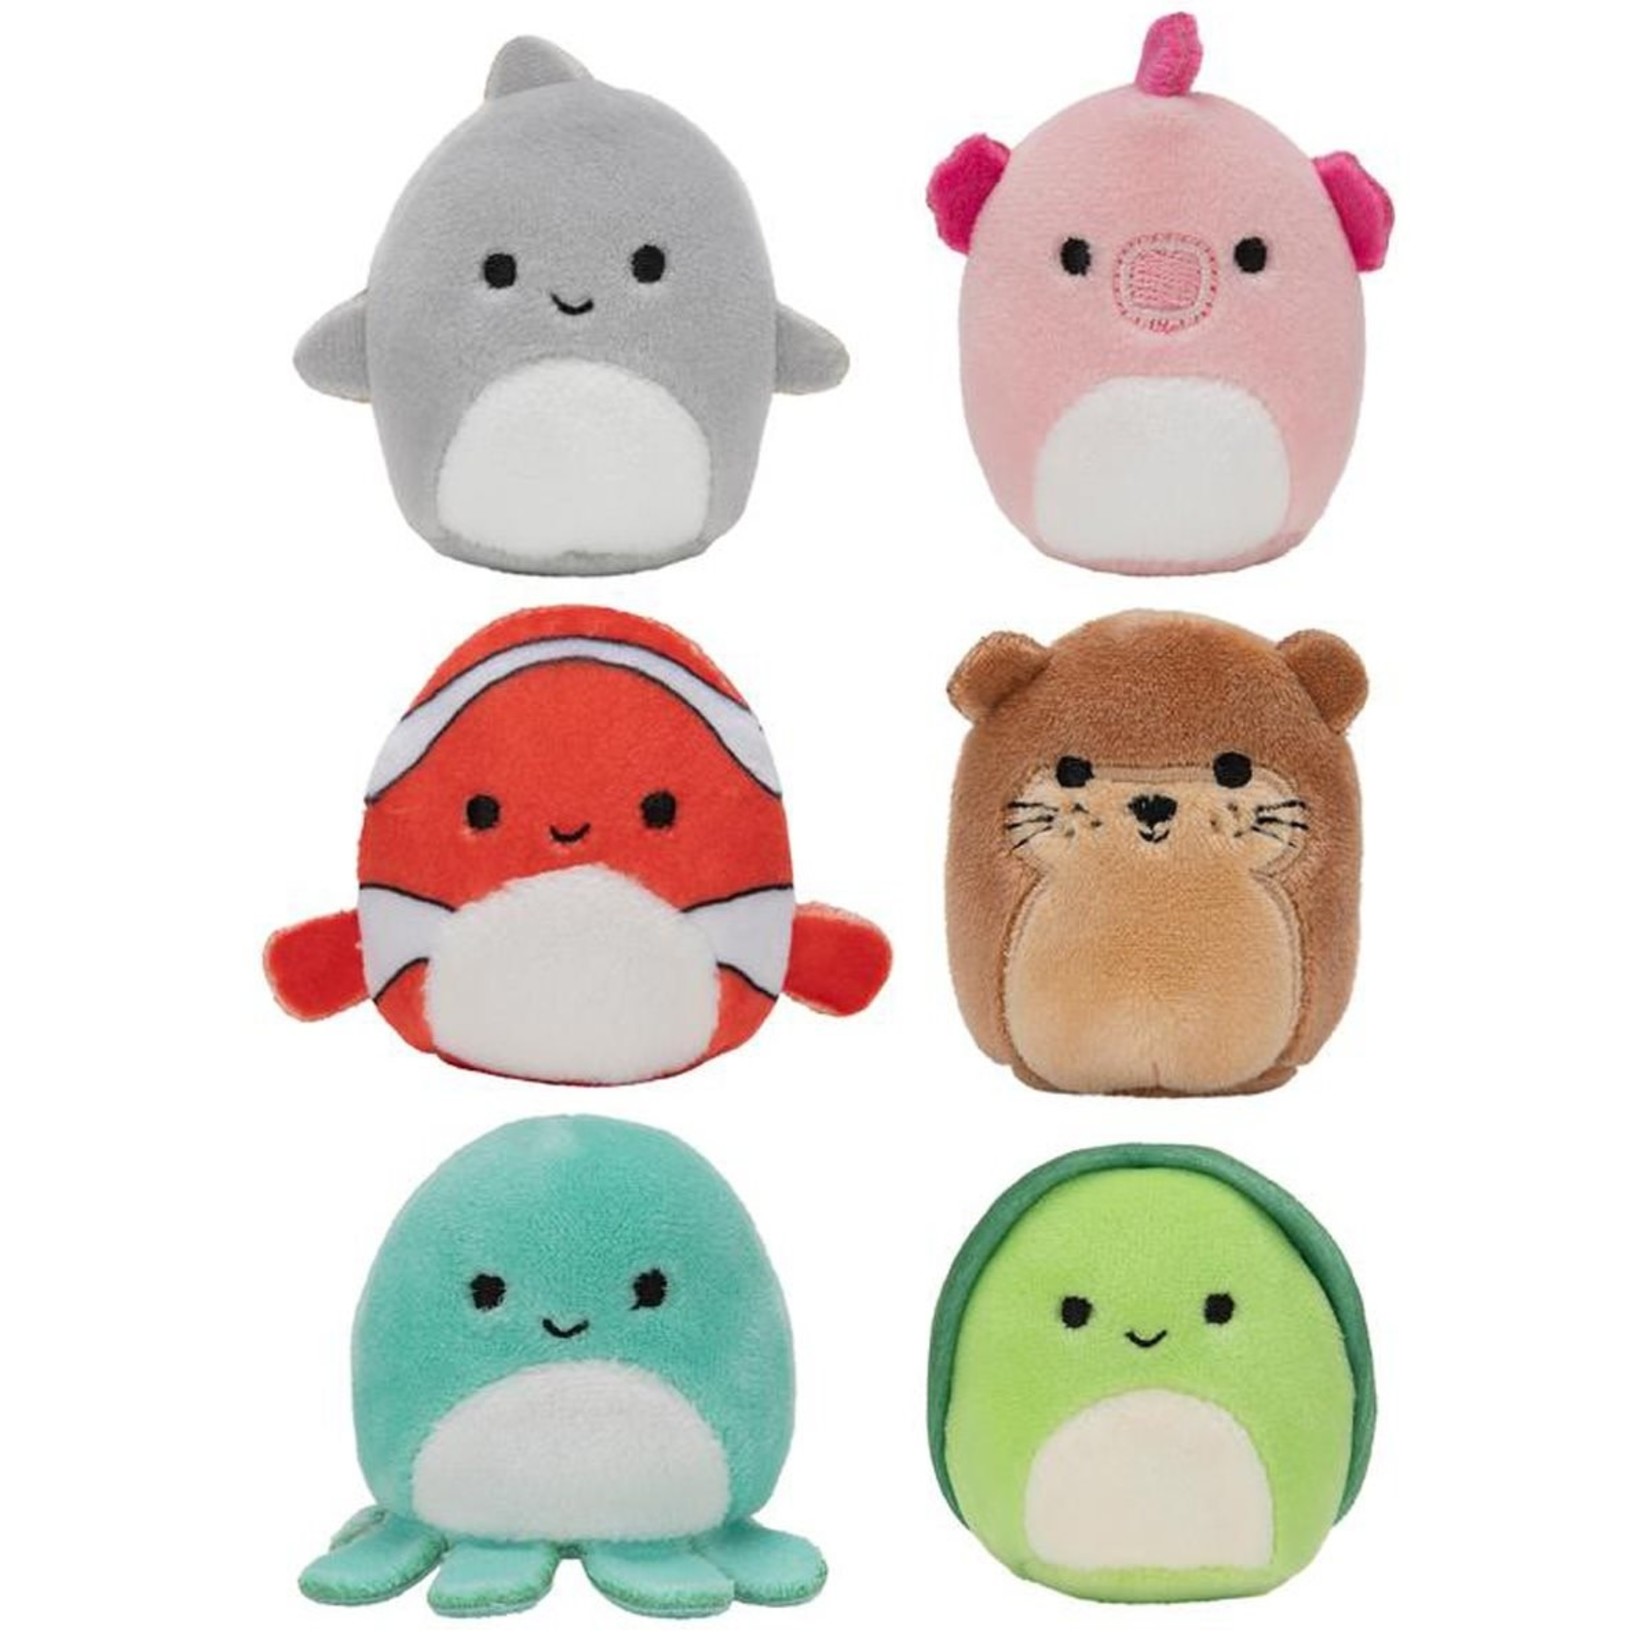 Squishville by Squishmallows 2-Inch Mini-Plush 6-Pack